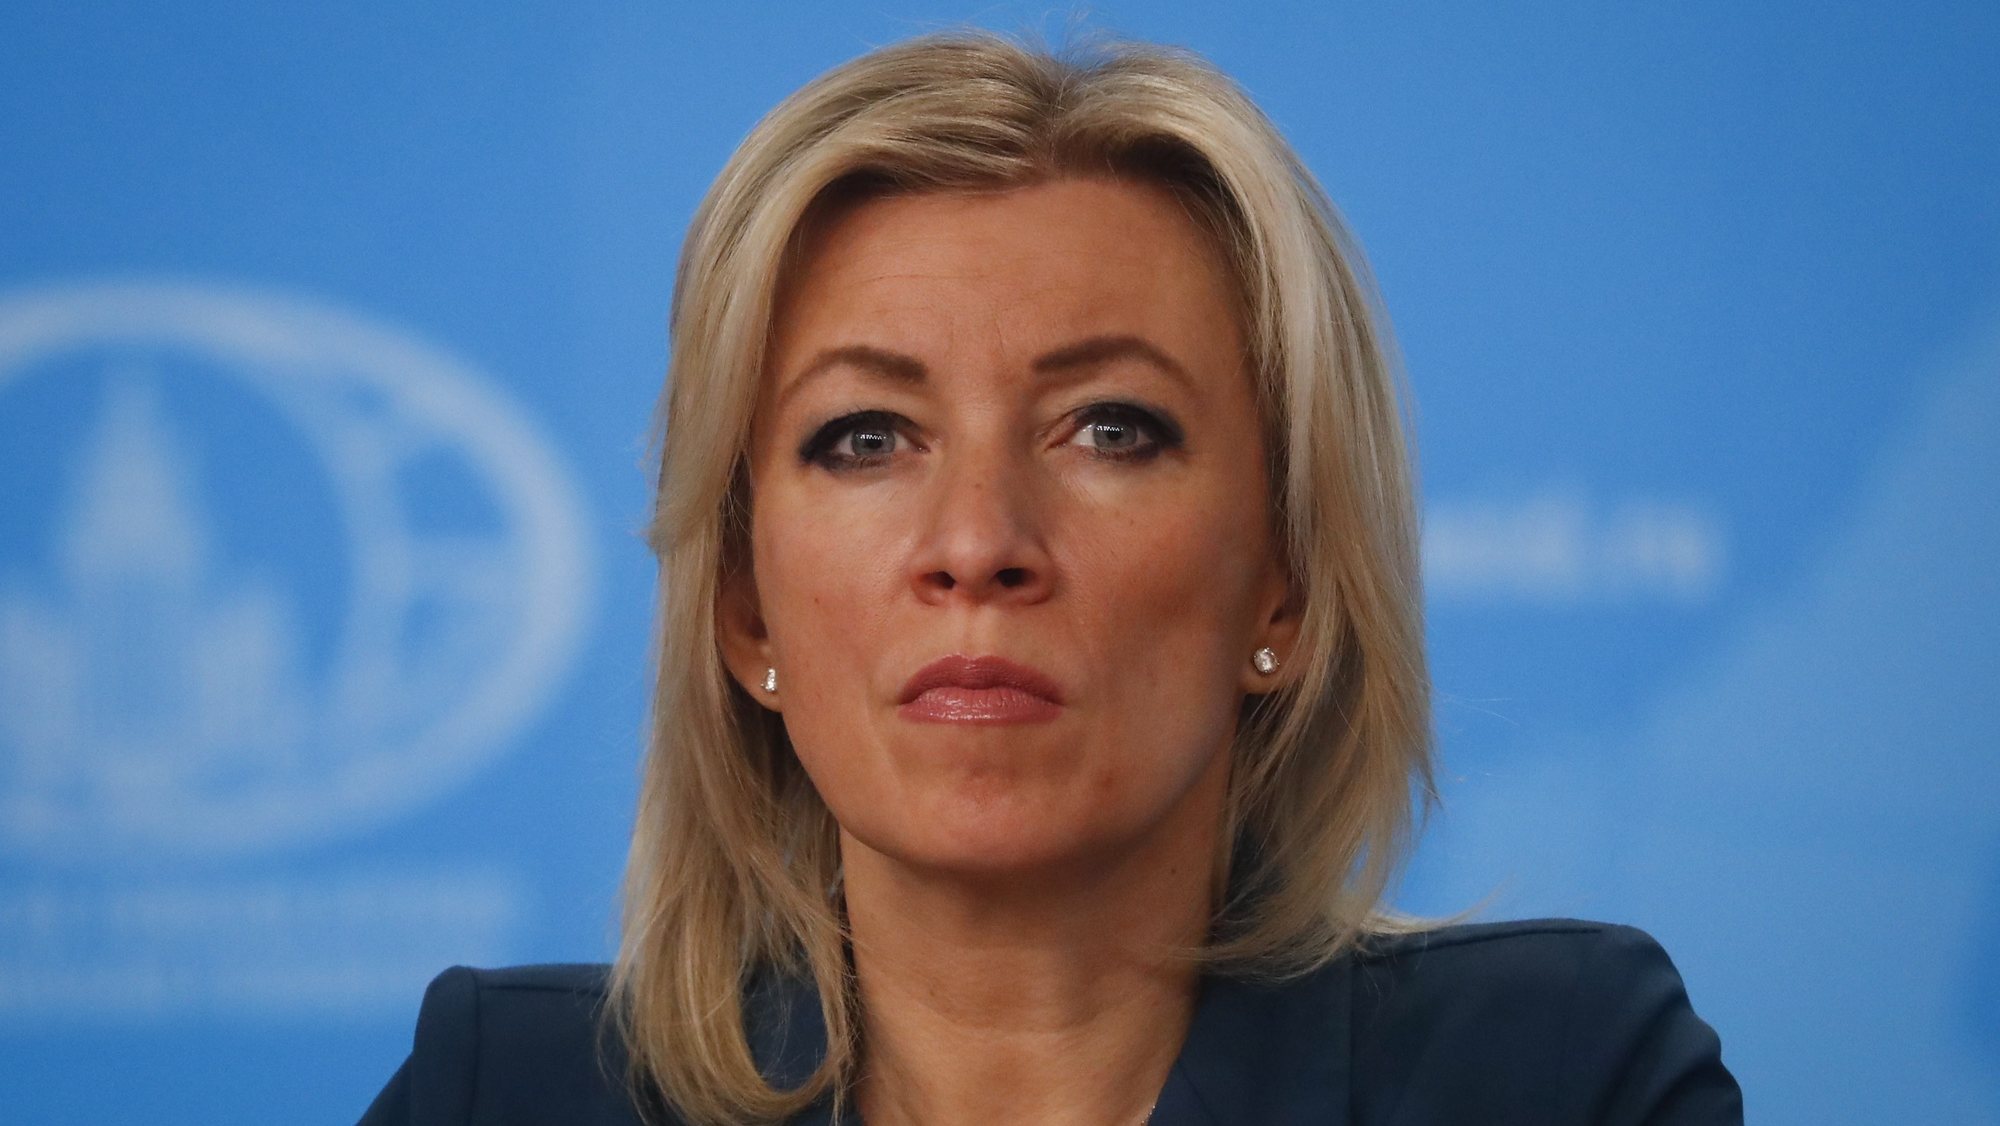 epa09684642 Russian Foreign Ministry spokeswoman Maria Zakharova during a annual news conference of Russian Foreign Minister Sergei Lavrov in Moscow, Russia, 14 January 2022. Sergei Lavrov gave a ​press conference on the results of Russian diplomacy in 2021.  EPA/MAXIM SHIPENKOV